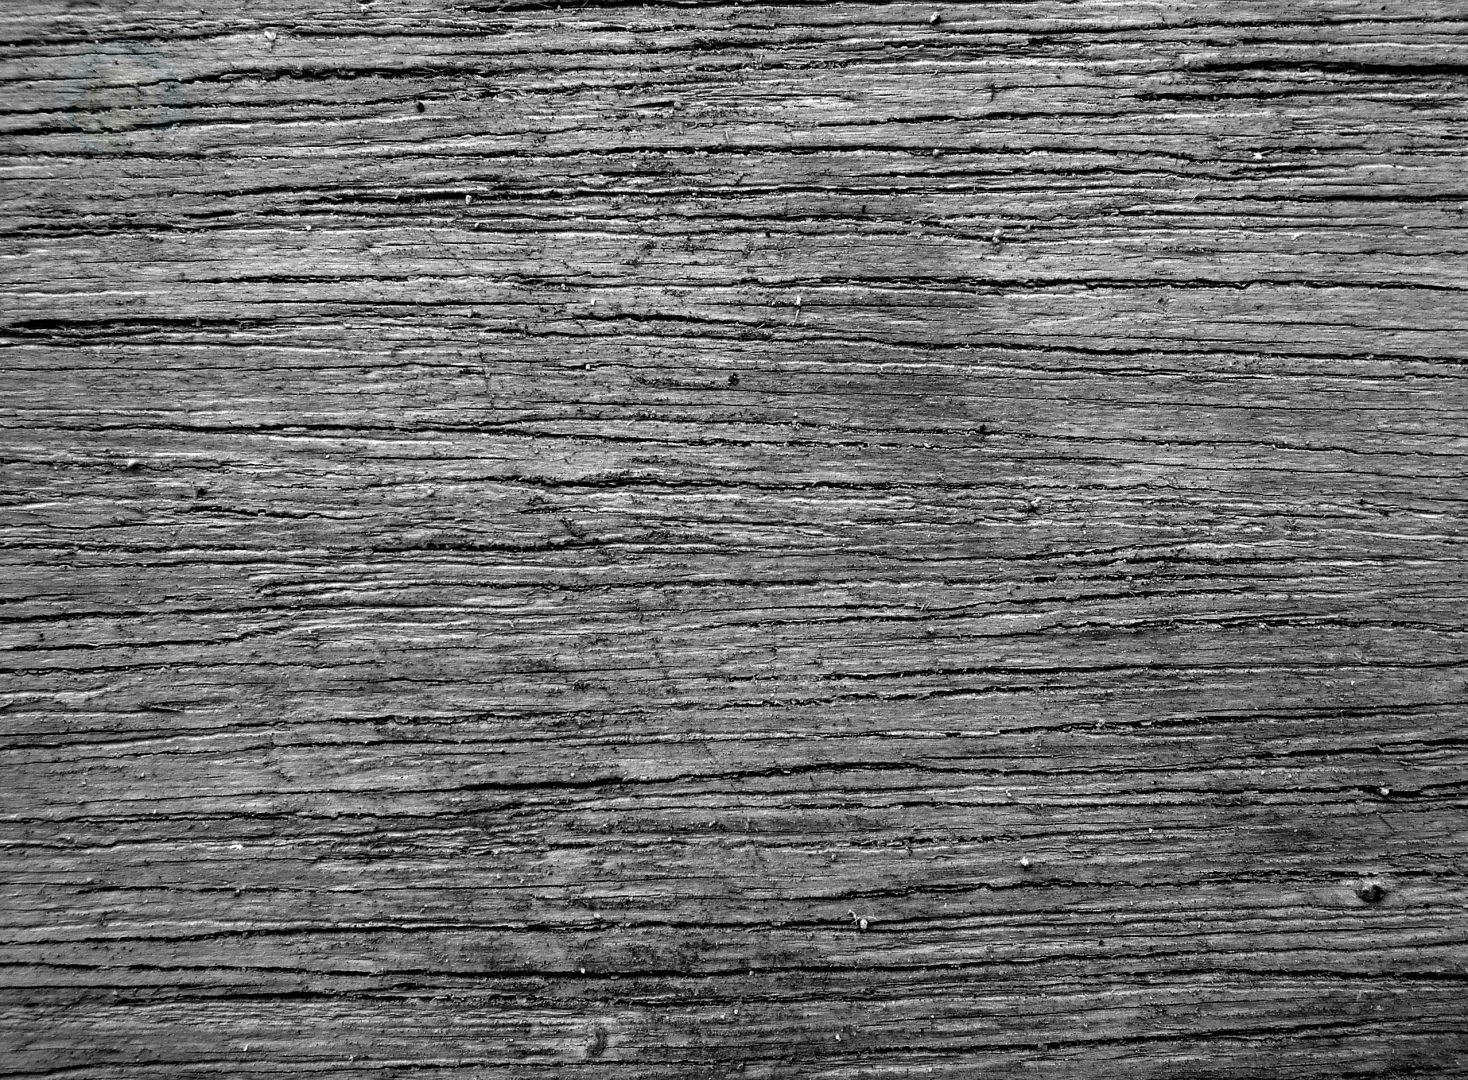 Download texture wood textures for 3d max - number 10313 at 3dlancer.net